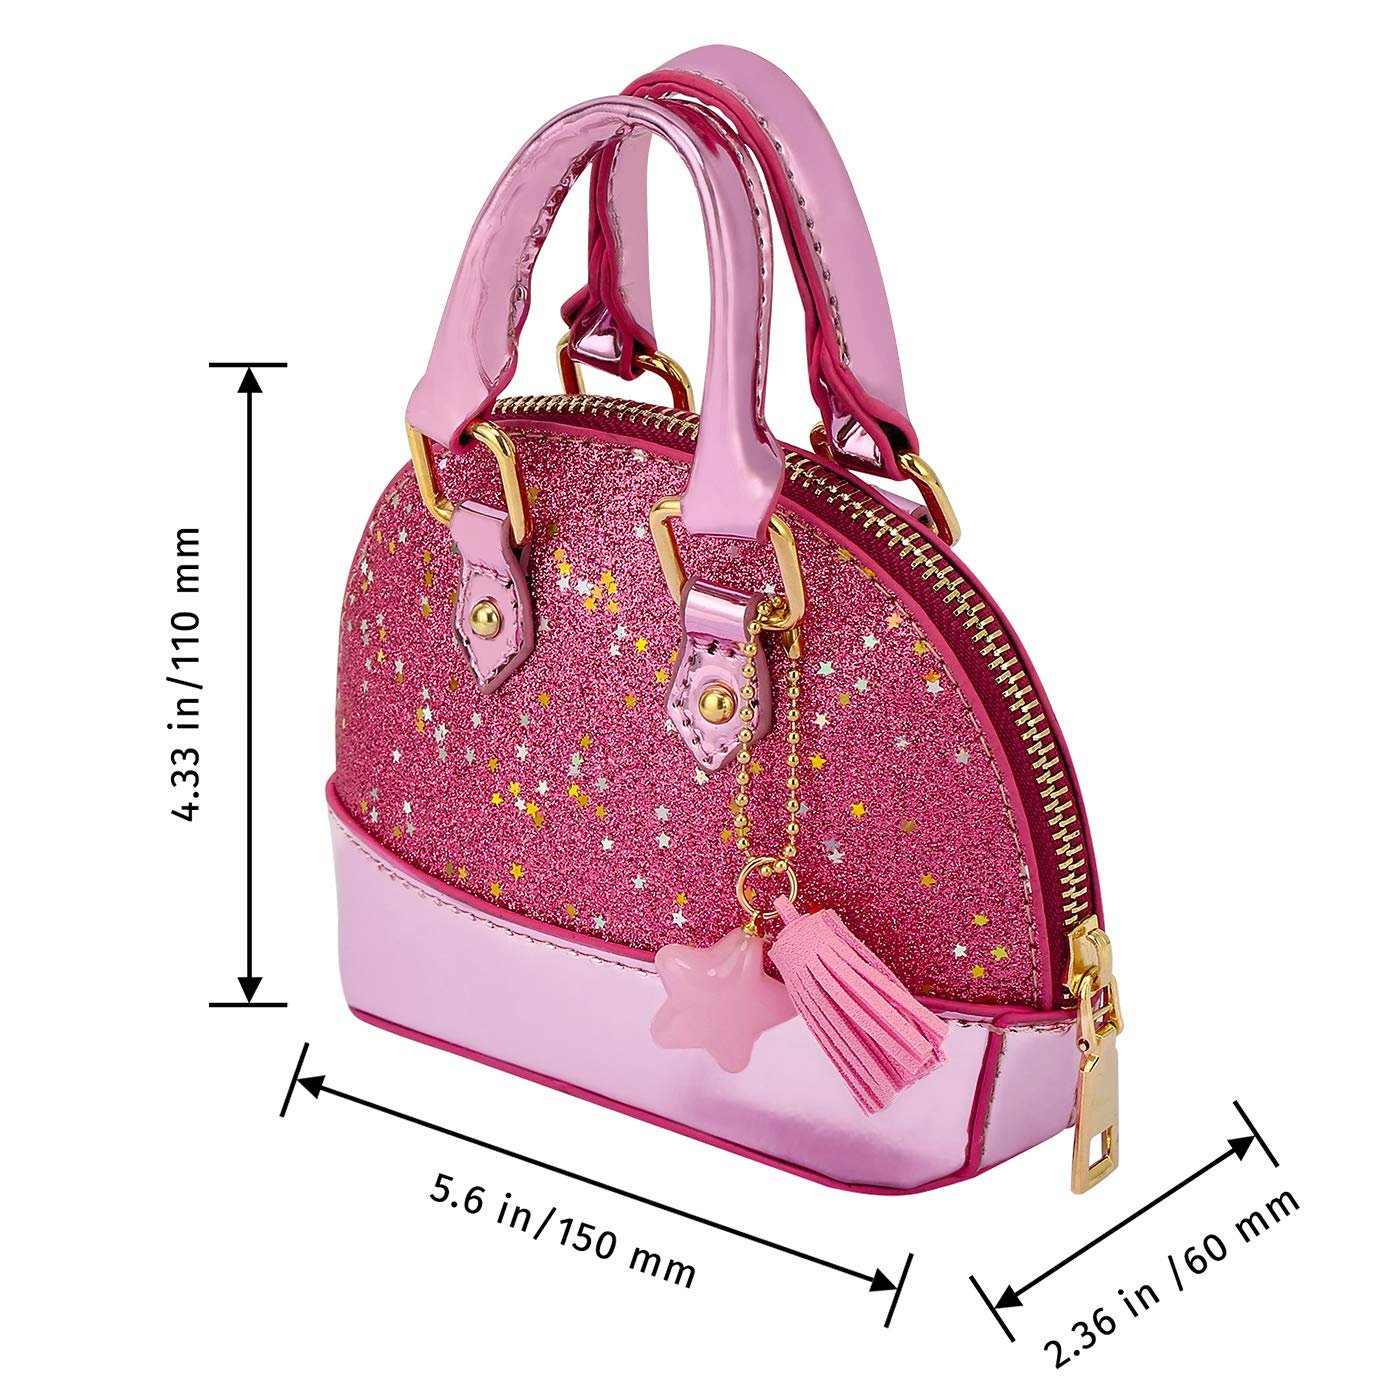 toy purse for toddler girl